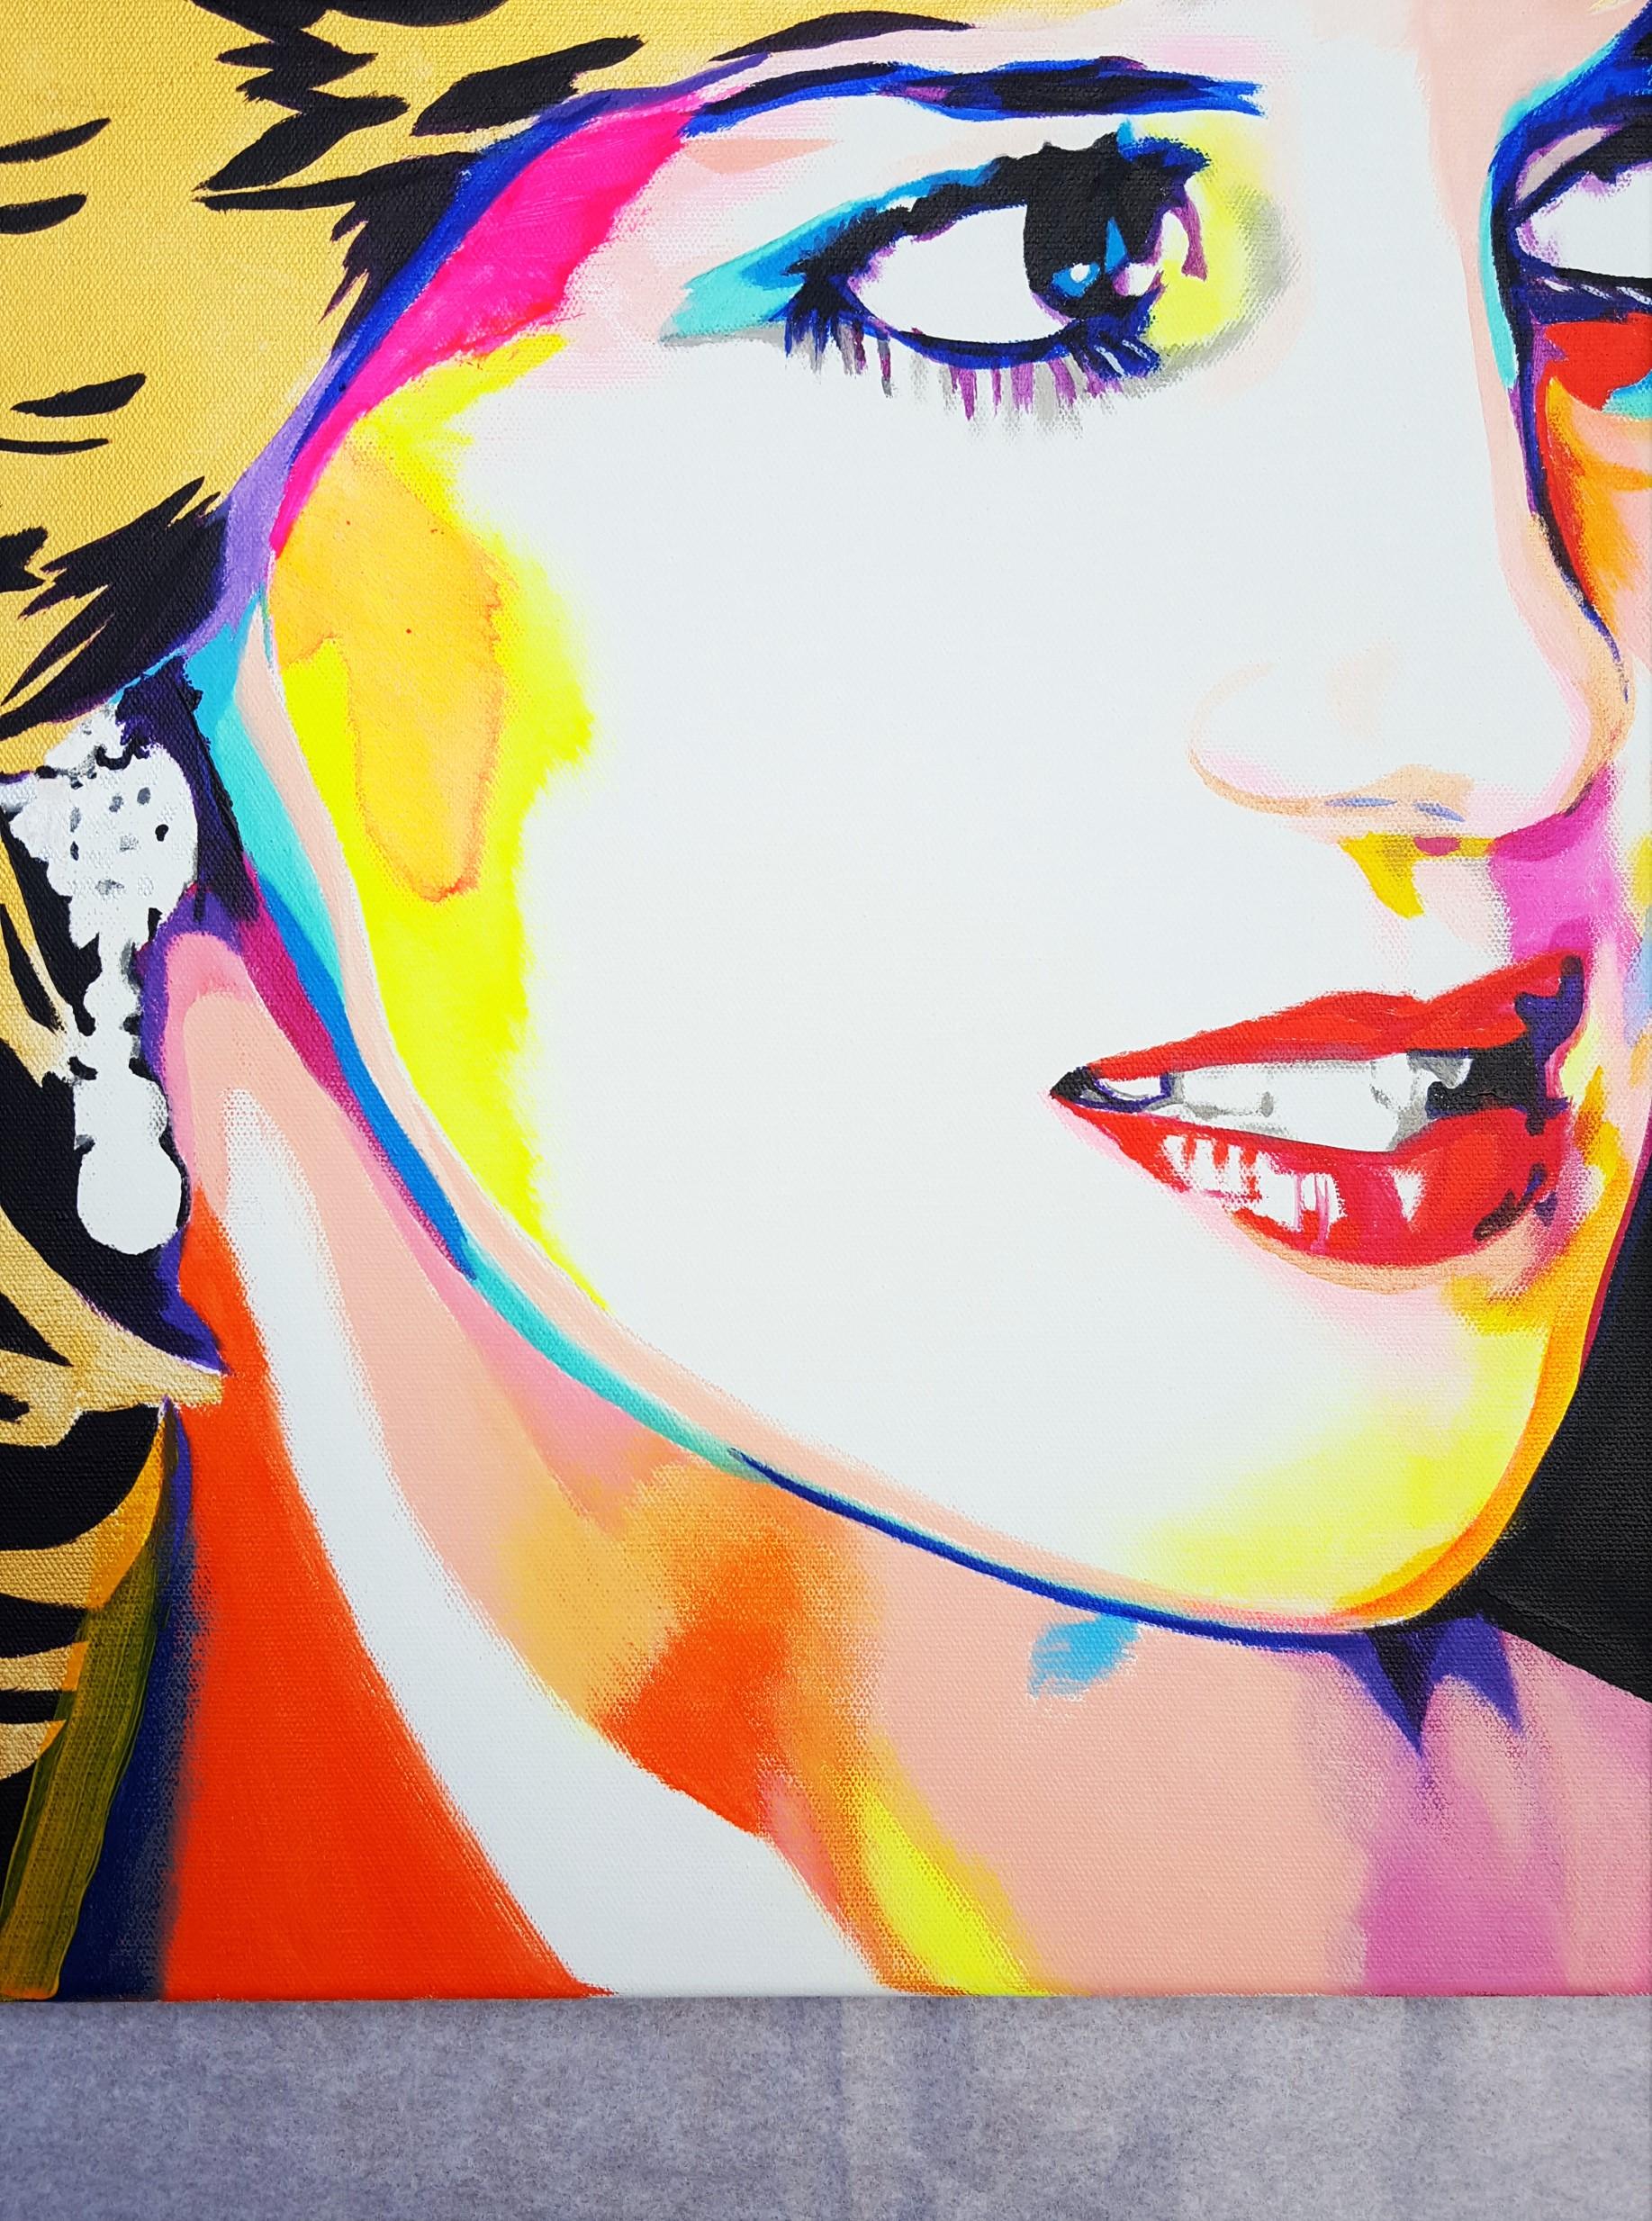 Princess Diana Icon IV - Black Portrait Painting by Jack Graves III